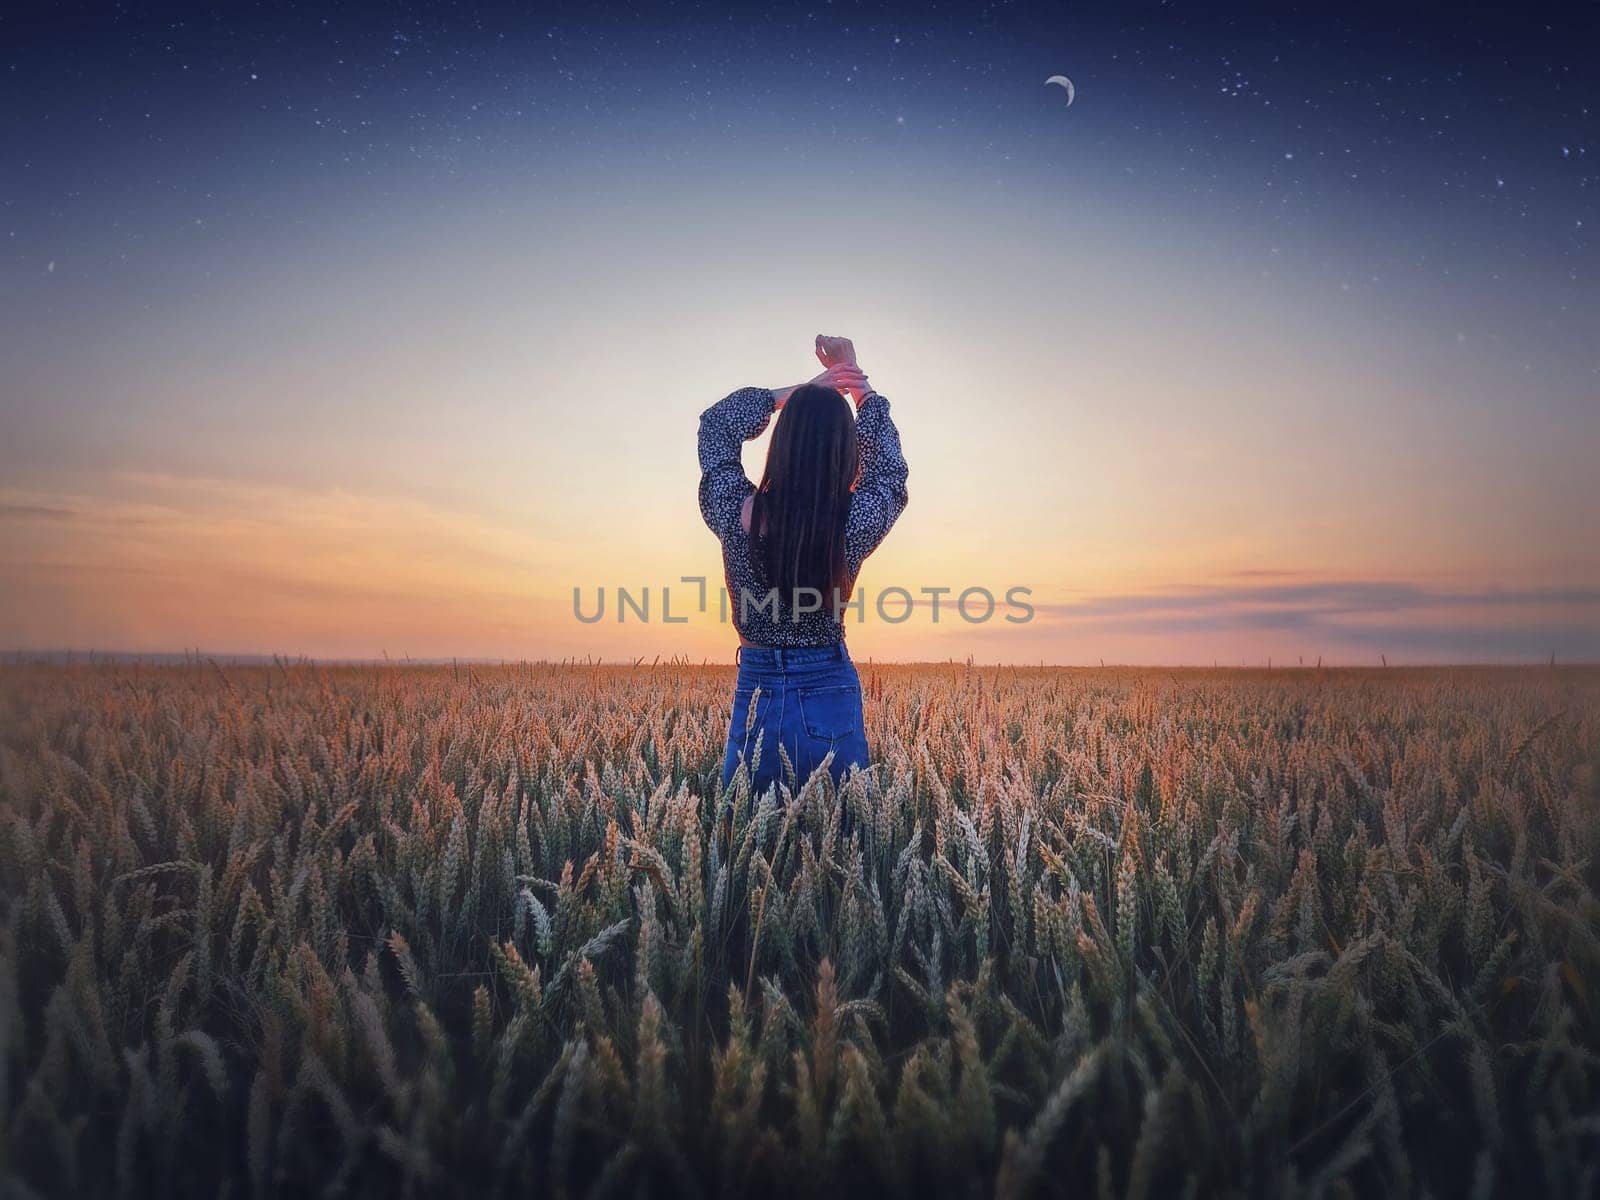 Girl in the golden wheat field at sunset. Beautiful twilight scenery under the summer starry sky with crescent moon. Magical natural scene, freedom concept by psychoshadow